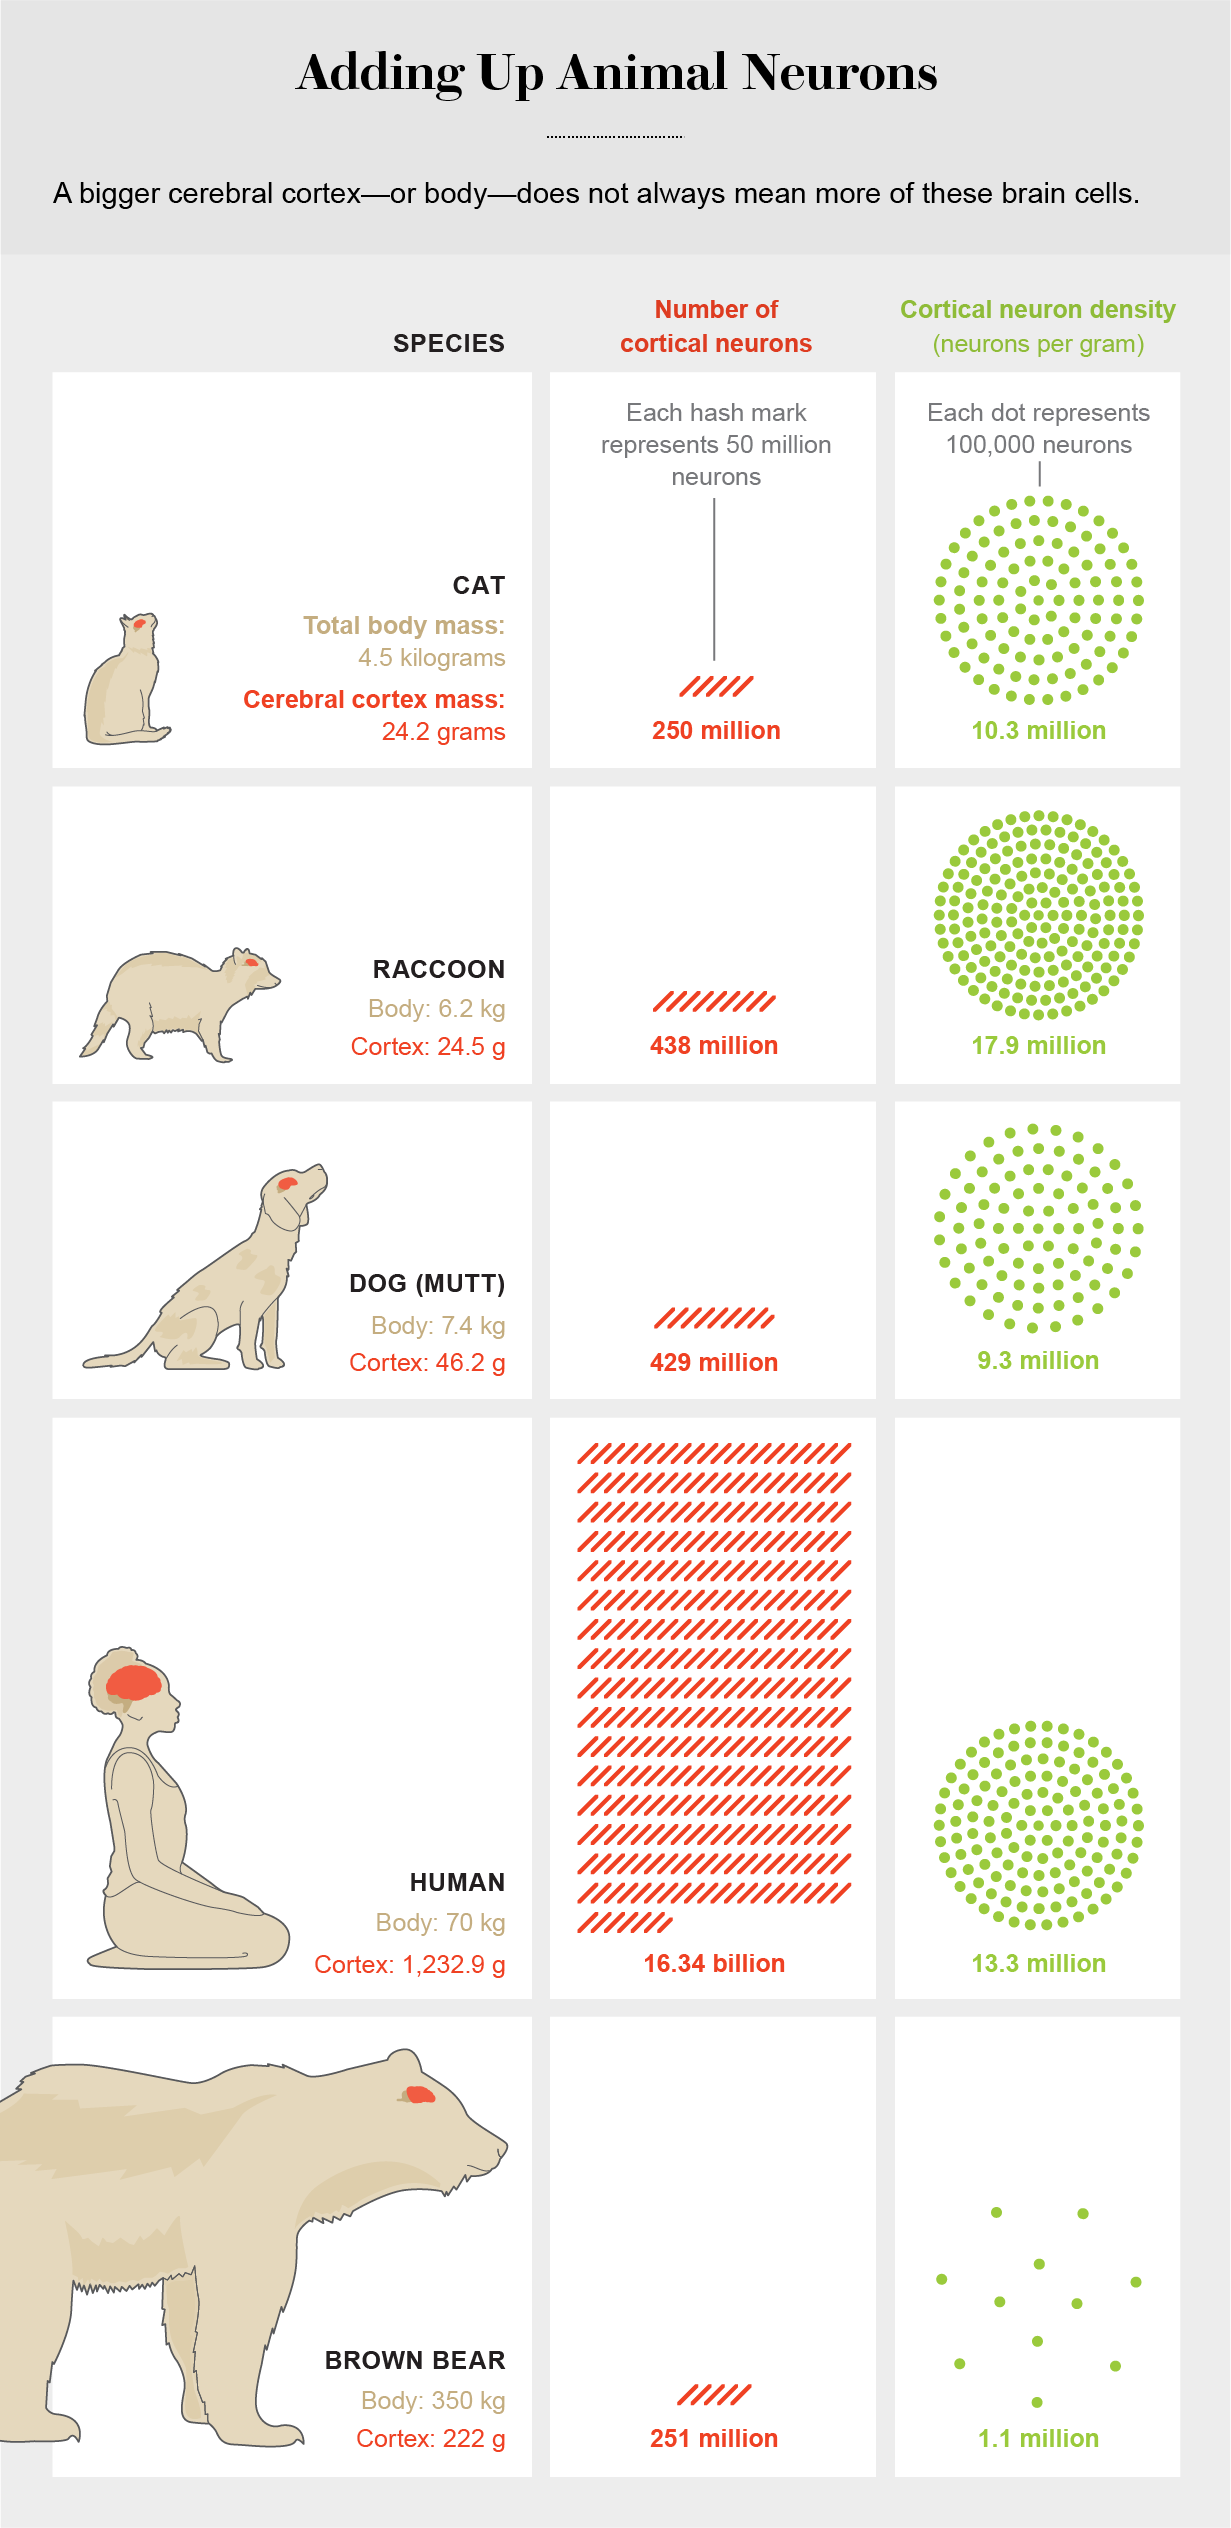 Dogs Have a Lot More Neurons Than Cats - Scientific American